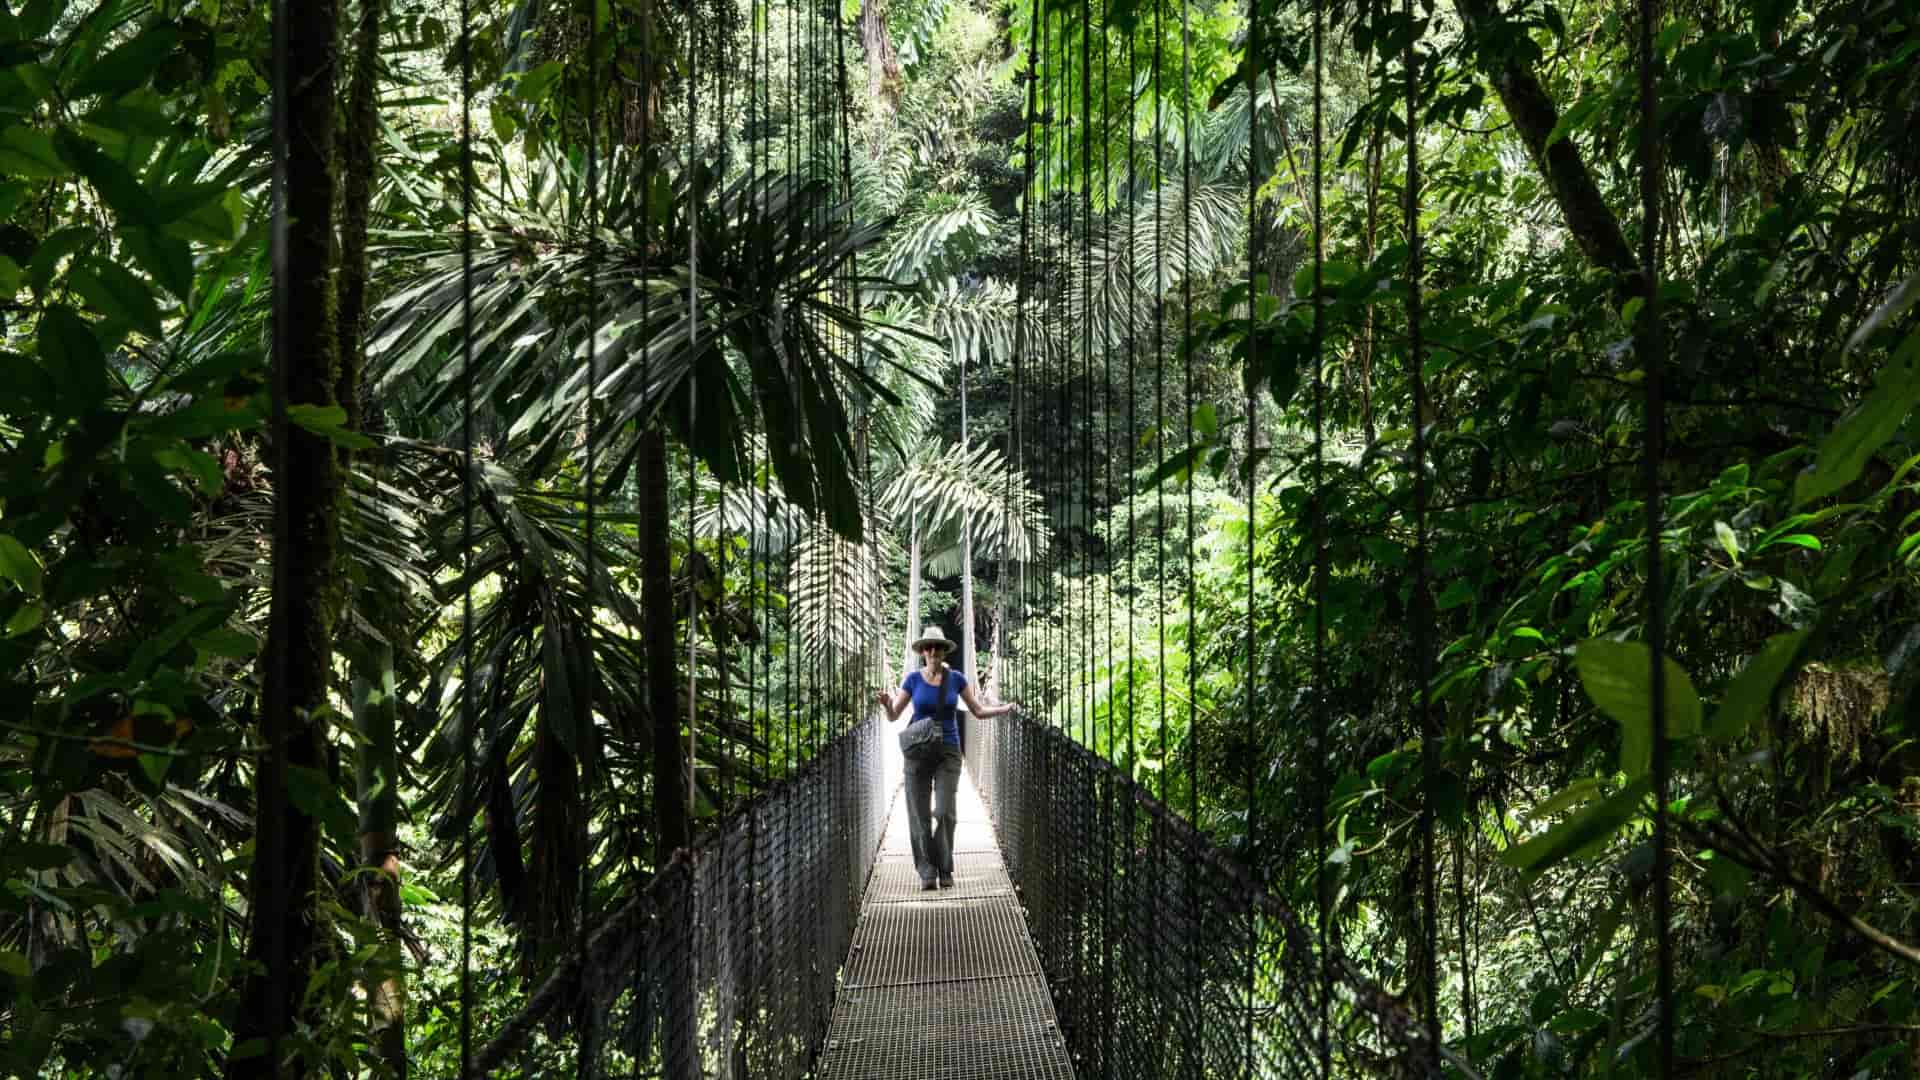 A person is walking on a suspension bridge surrounded by lush, dense tropical rainforest vegetation. The bridge is elevated, providing a breathtaking view of the verdant greenery. The person is wearing a hat and casual outdoor clothing, suggesting they are on a hike or an adventure tour. The scene captures the beauty and immersion of being in the heart of a rainforest, with sunlight filtering through the canopy above.